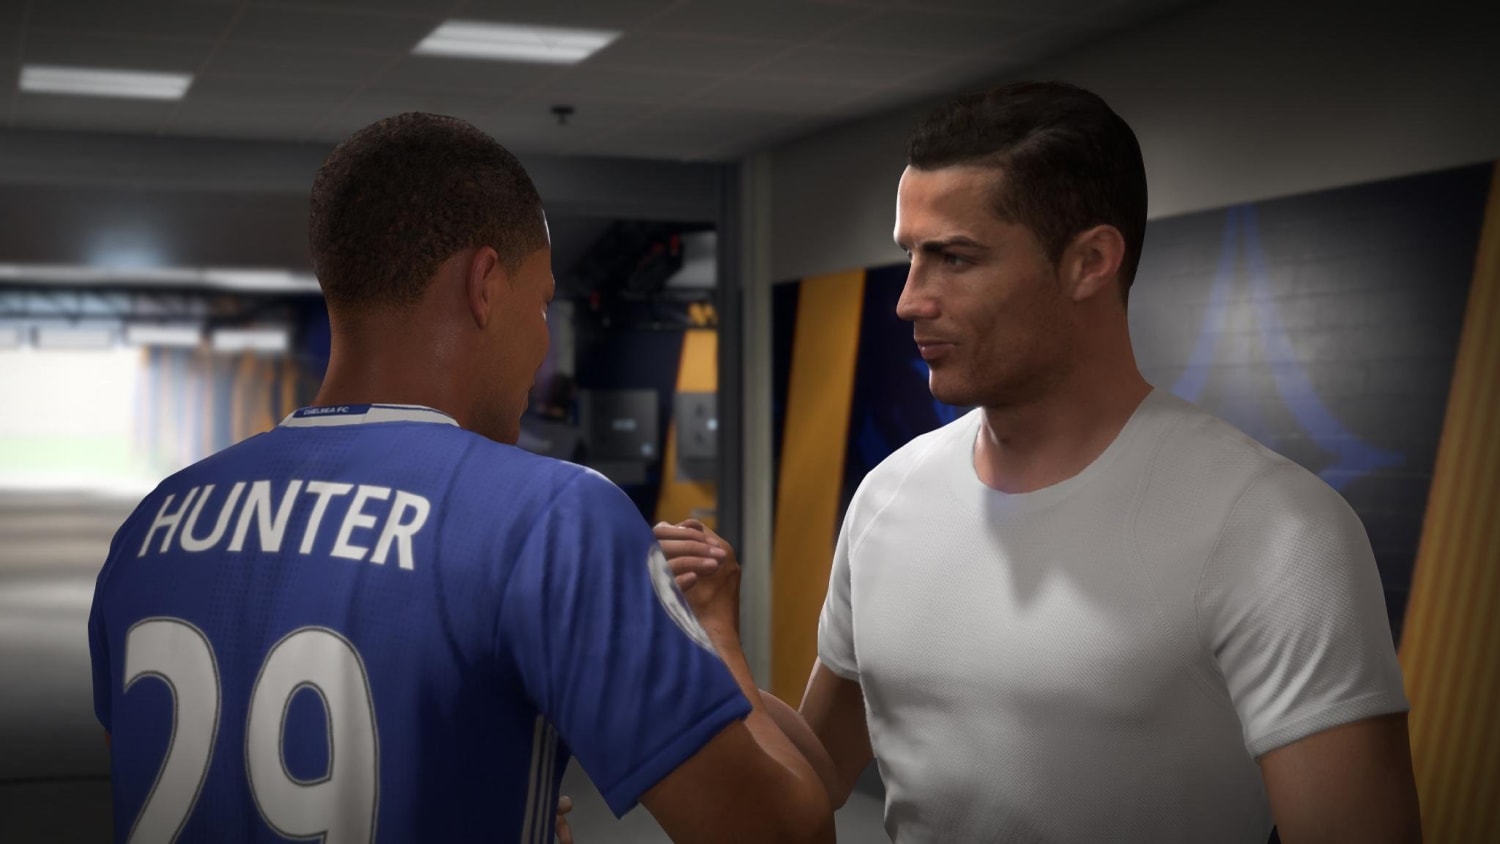 Fifa 18 News The Demo Is Out Now